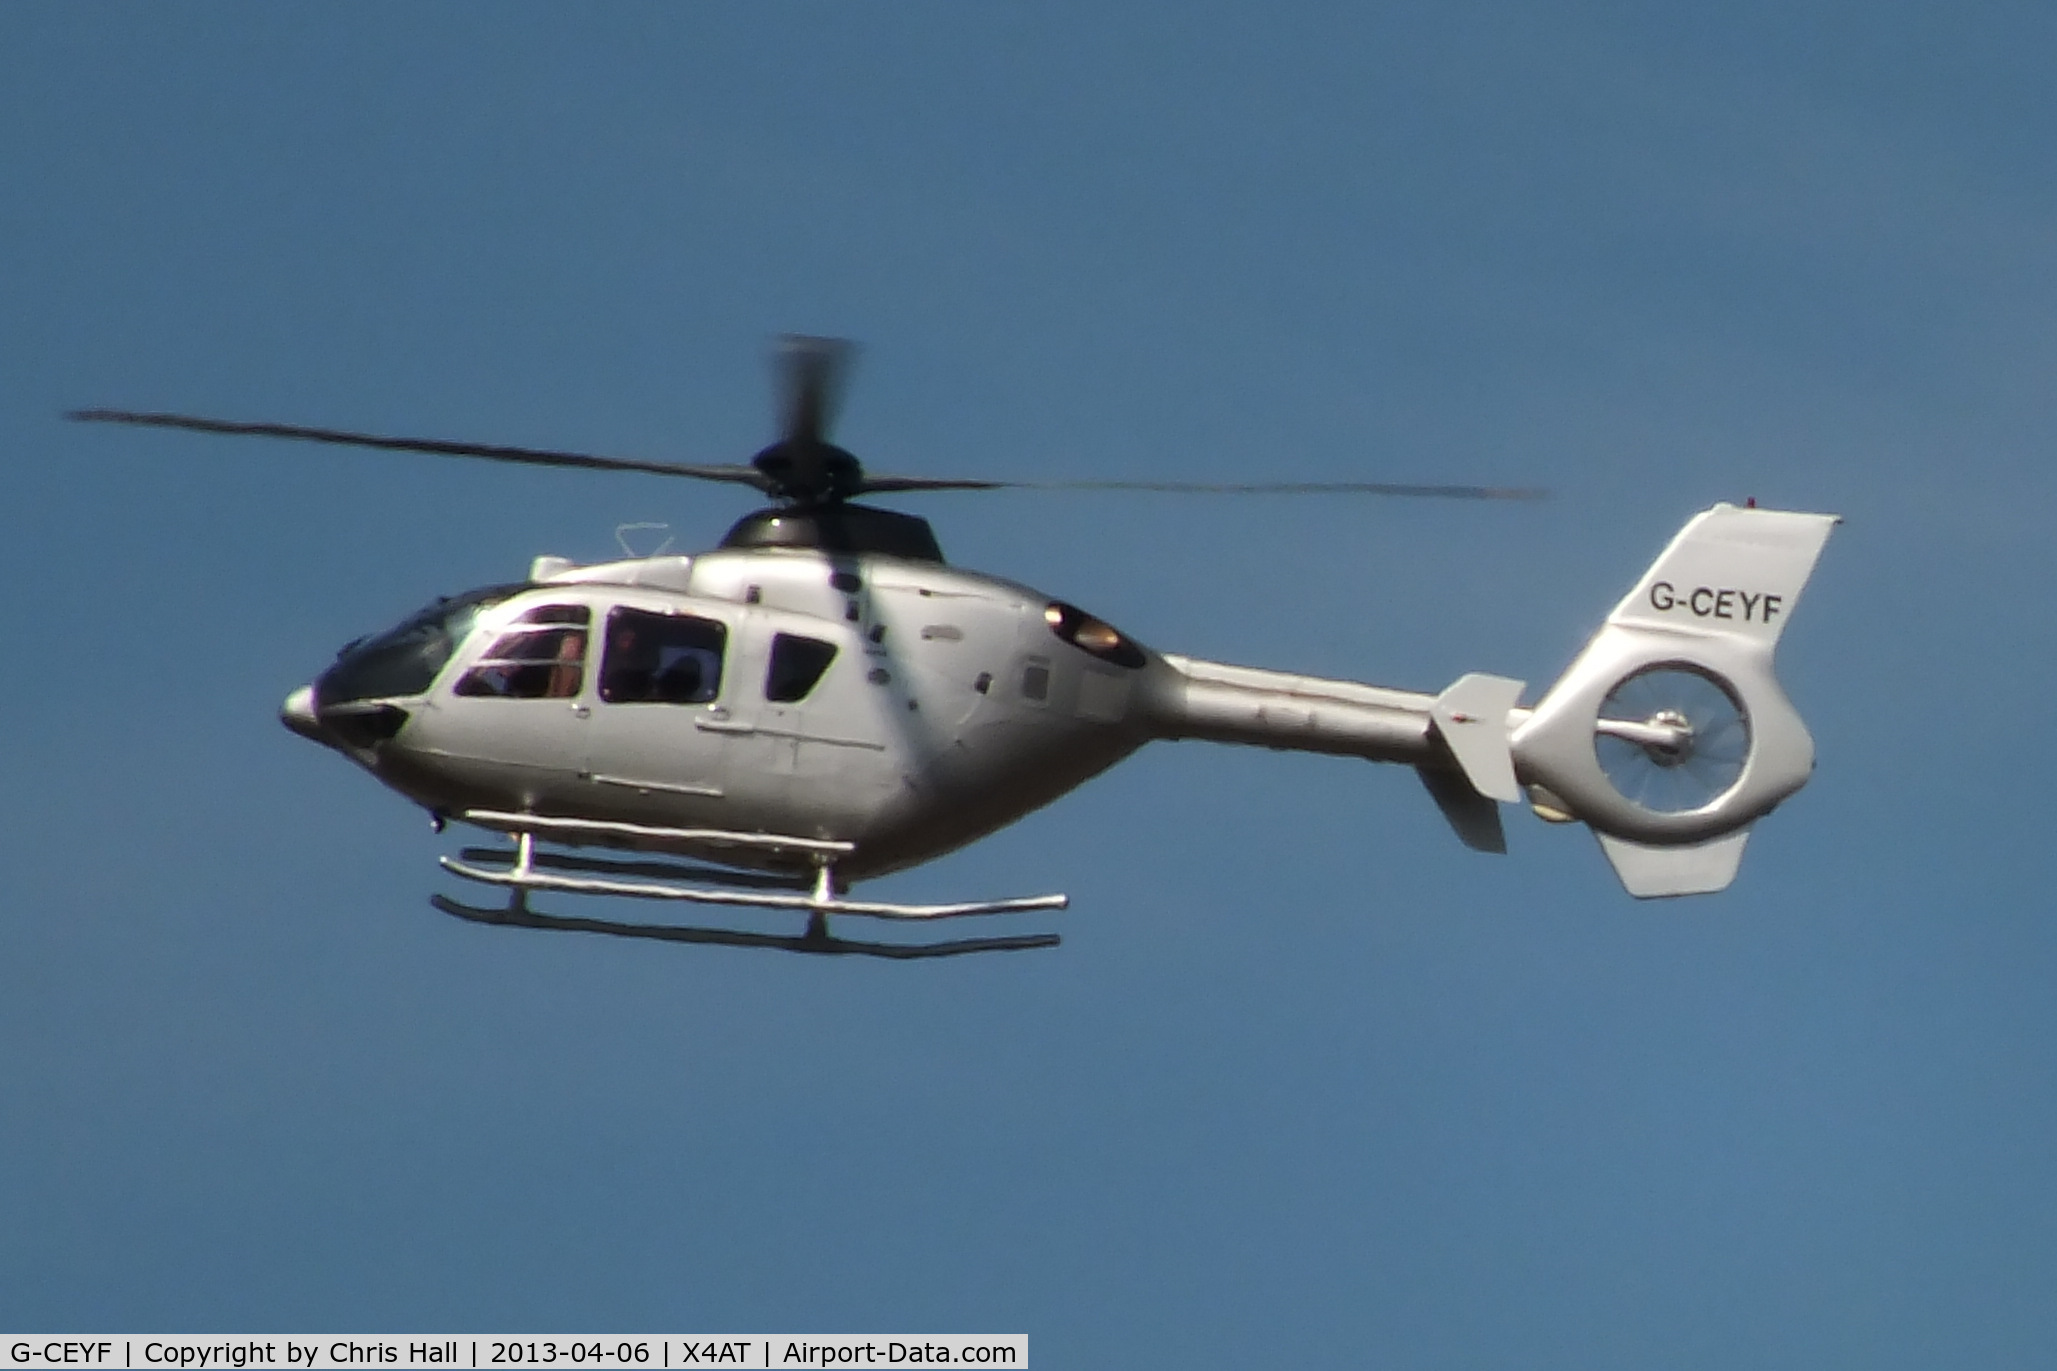 G-CEYF, 1999 Eurocopter EC-135T-1 C/N 0115, Ferrying racegoers into Aintree for the 2013 Grand National